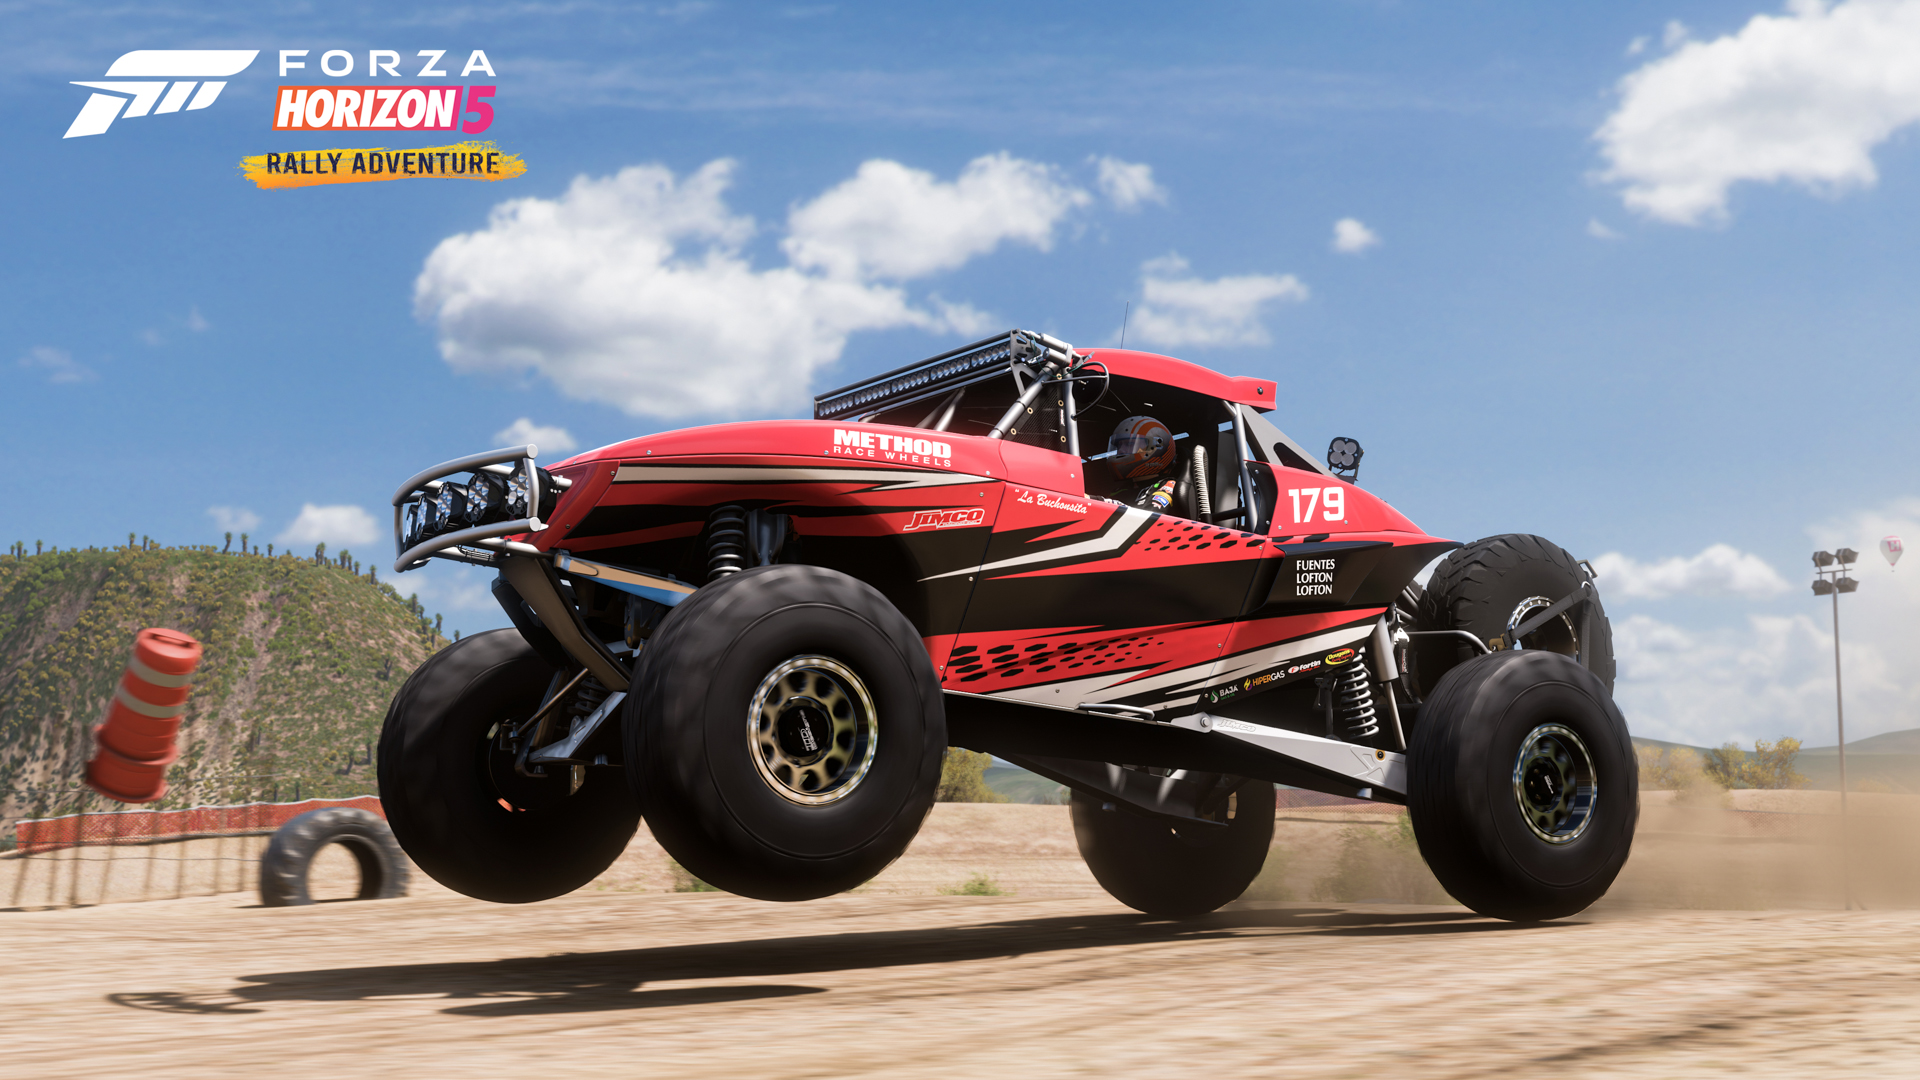 Forza Horizon 5 Rally Adventure is Now Available - Xbox Wire